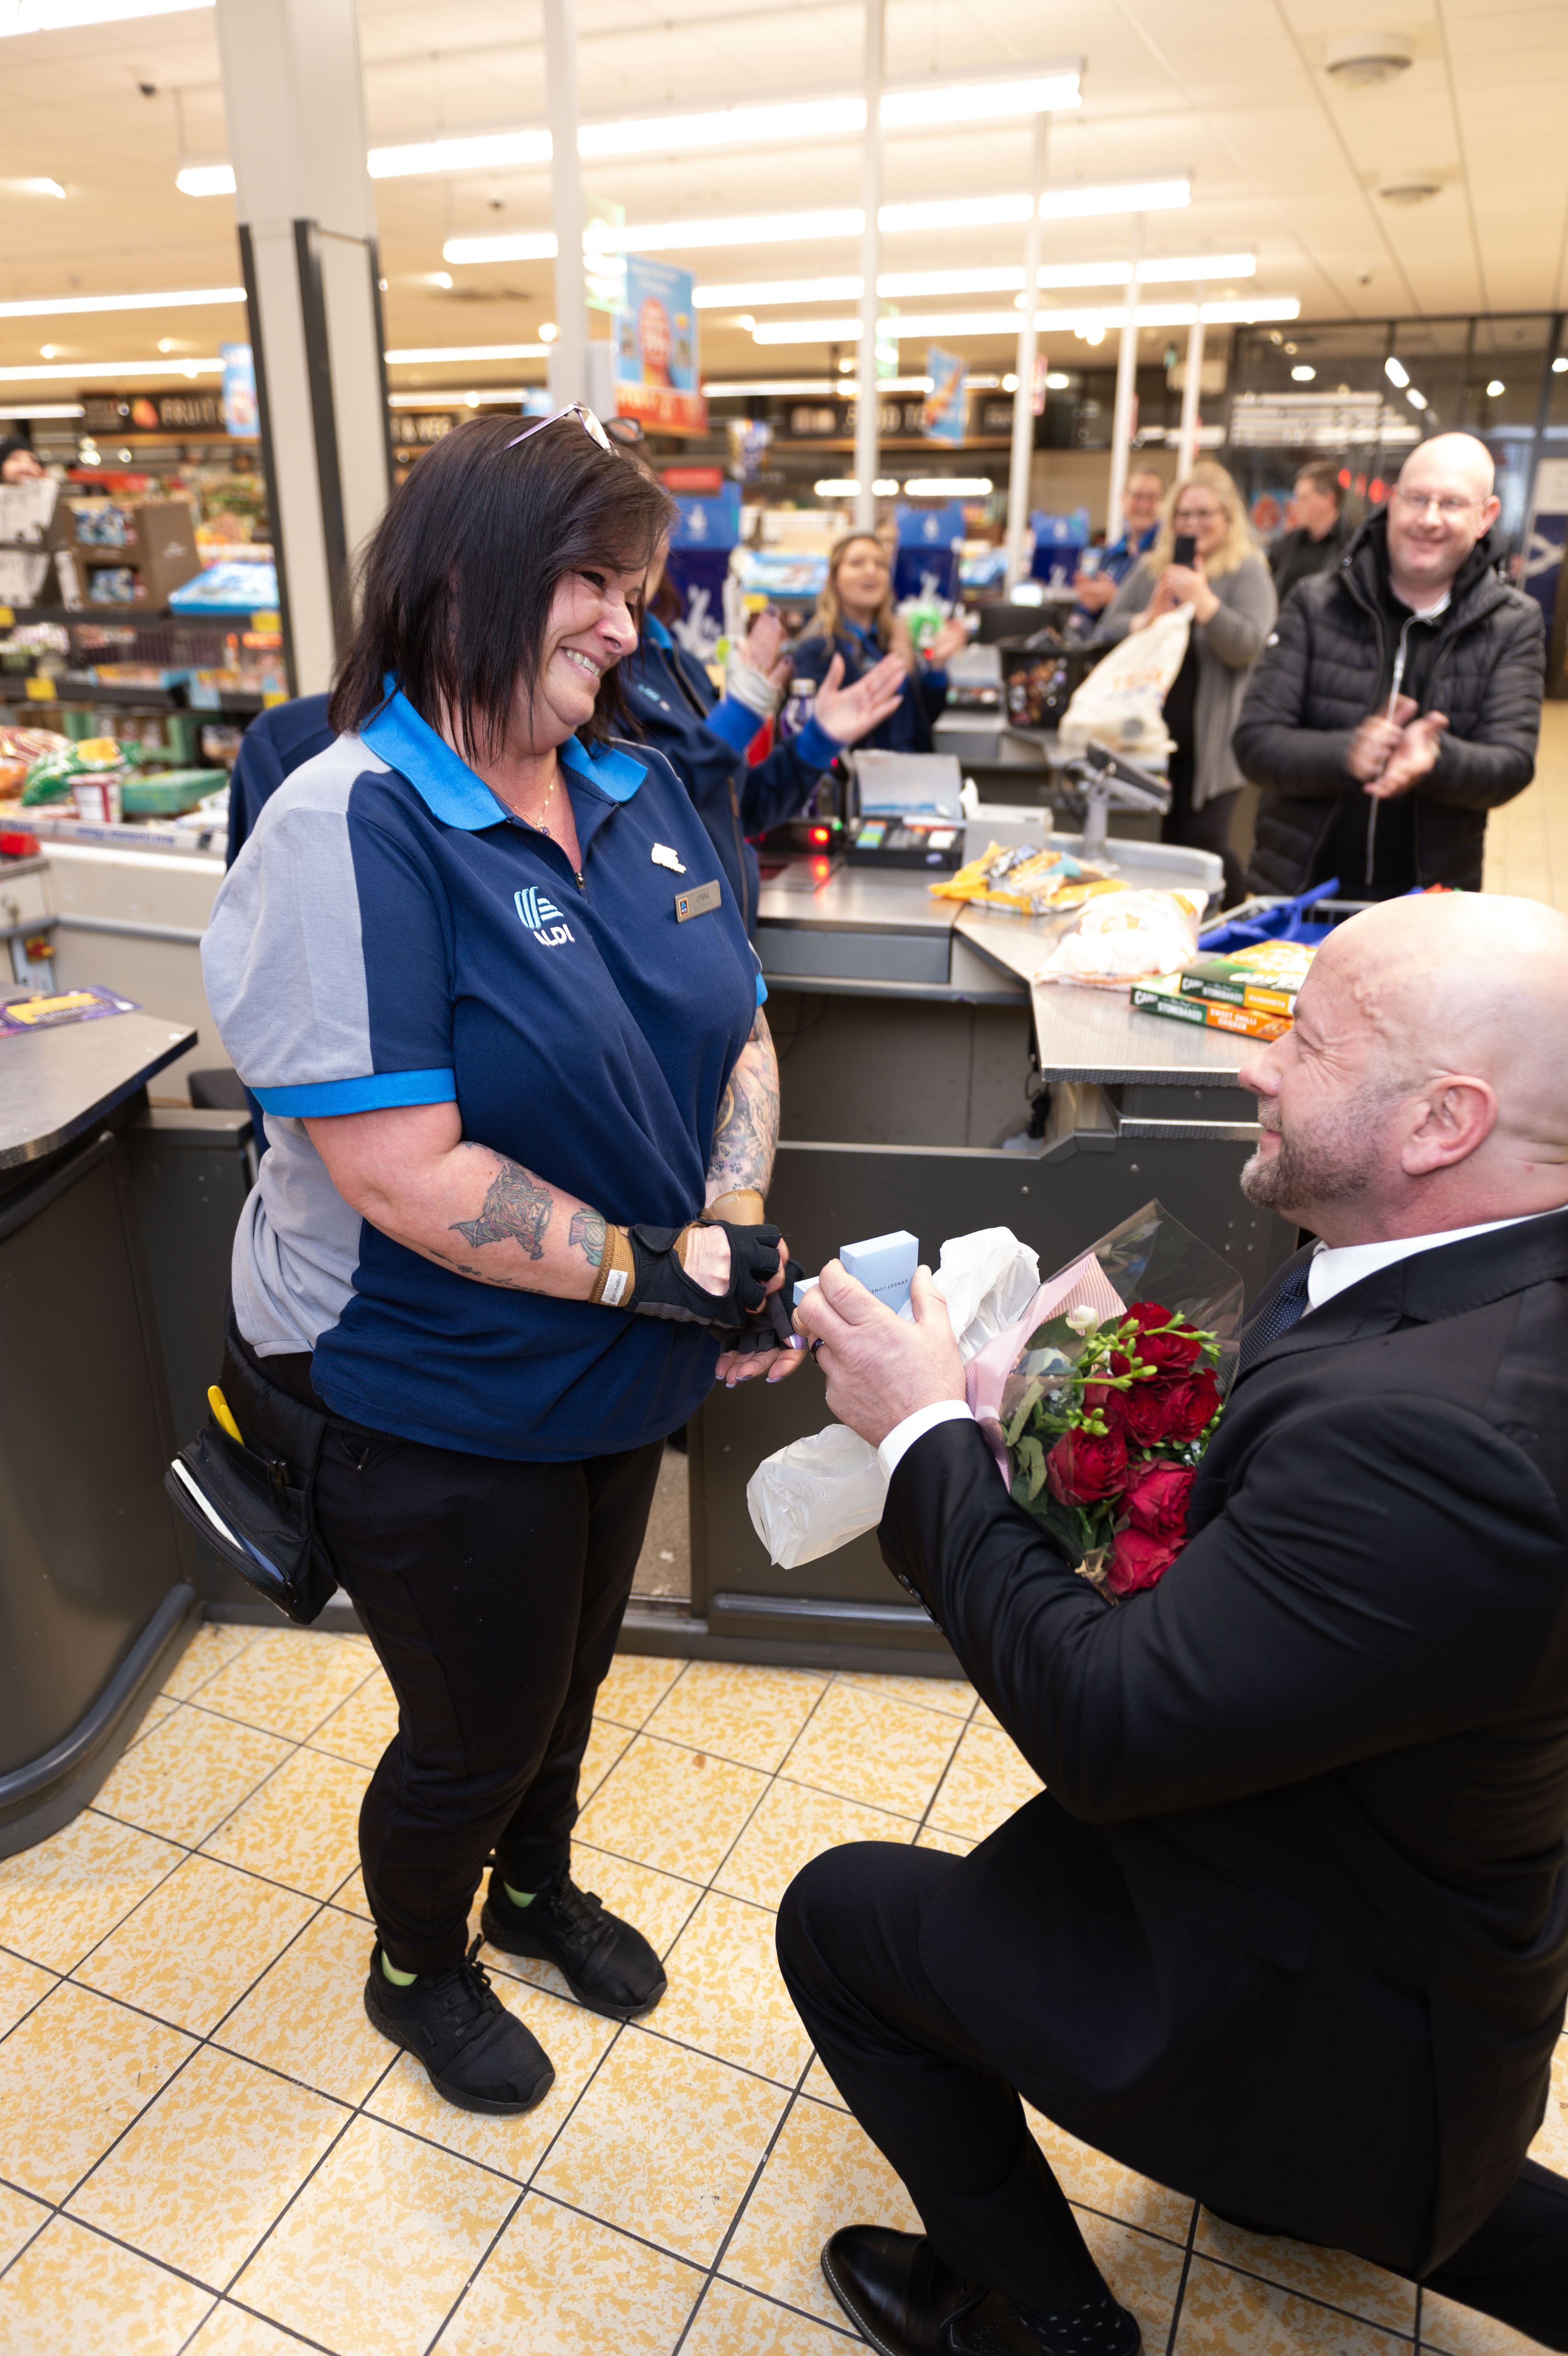 Lynne was surprised while putting through a customer's shopping as her partner proposed.